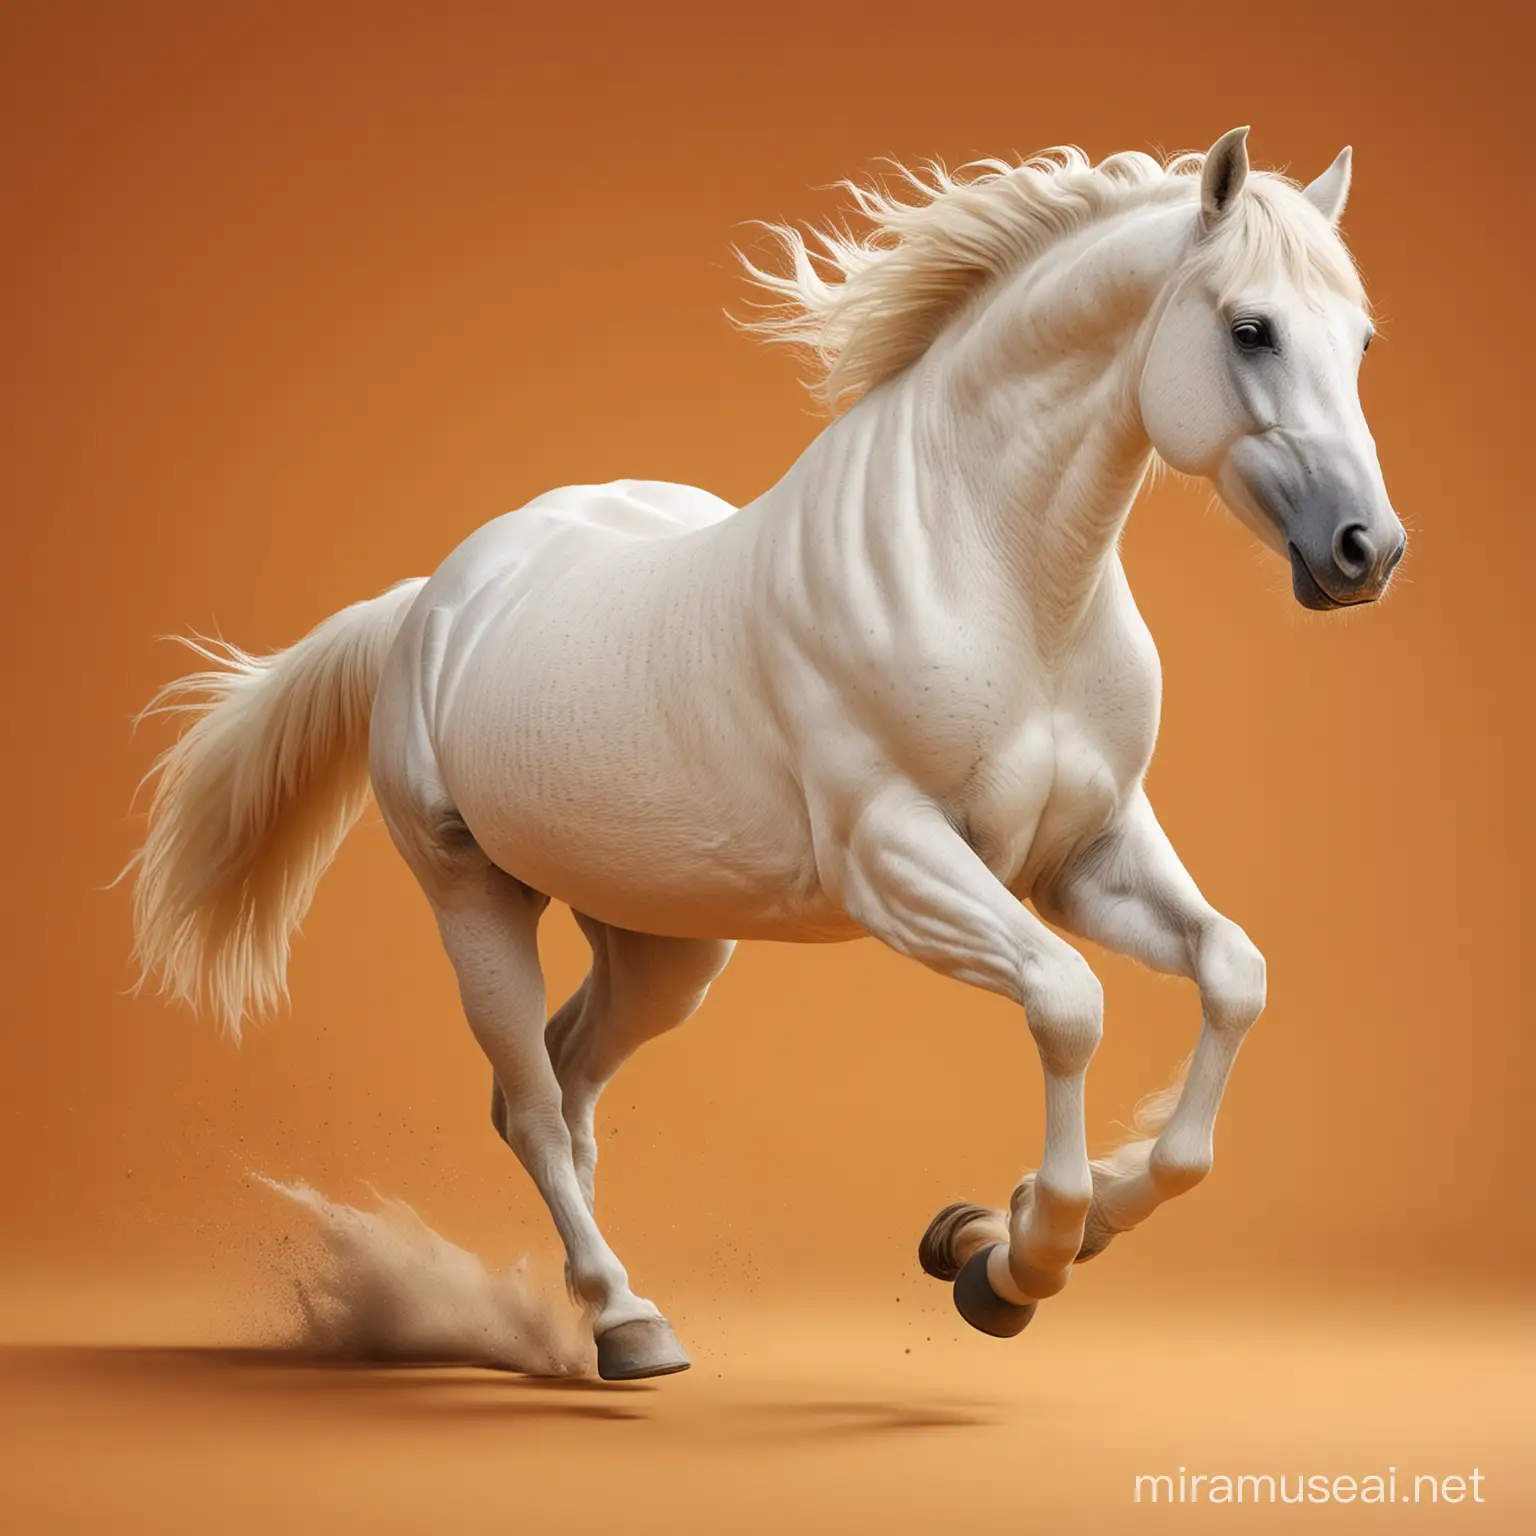 pure realistic white horse running, on an orange background
